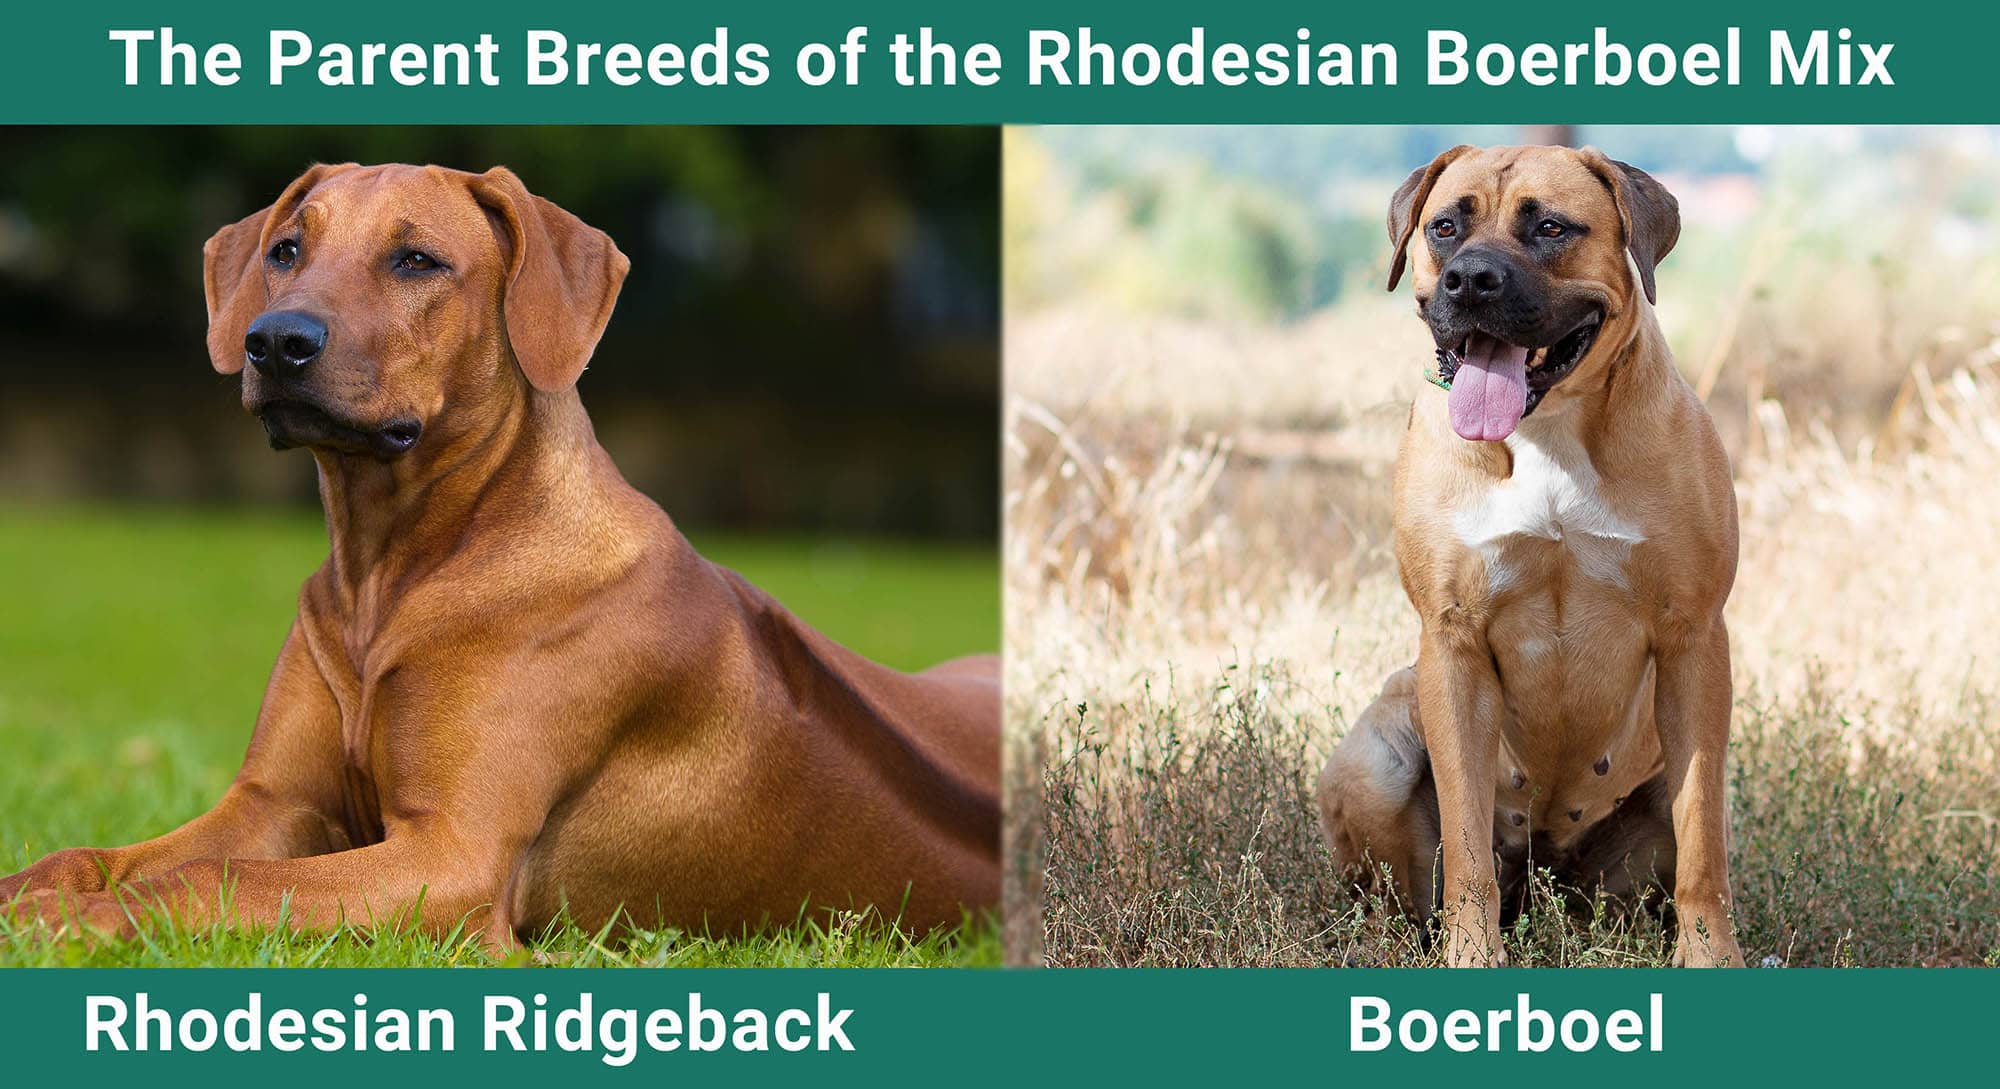 The Parent Breeds of the Rhodesian Boerboel Mix